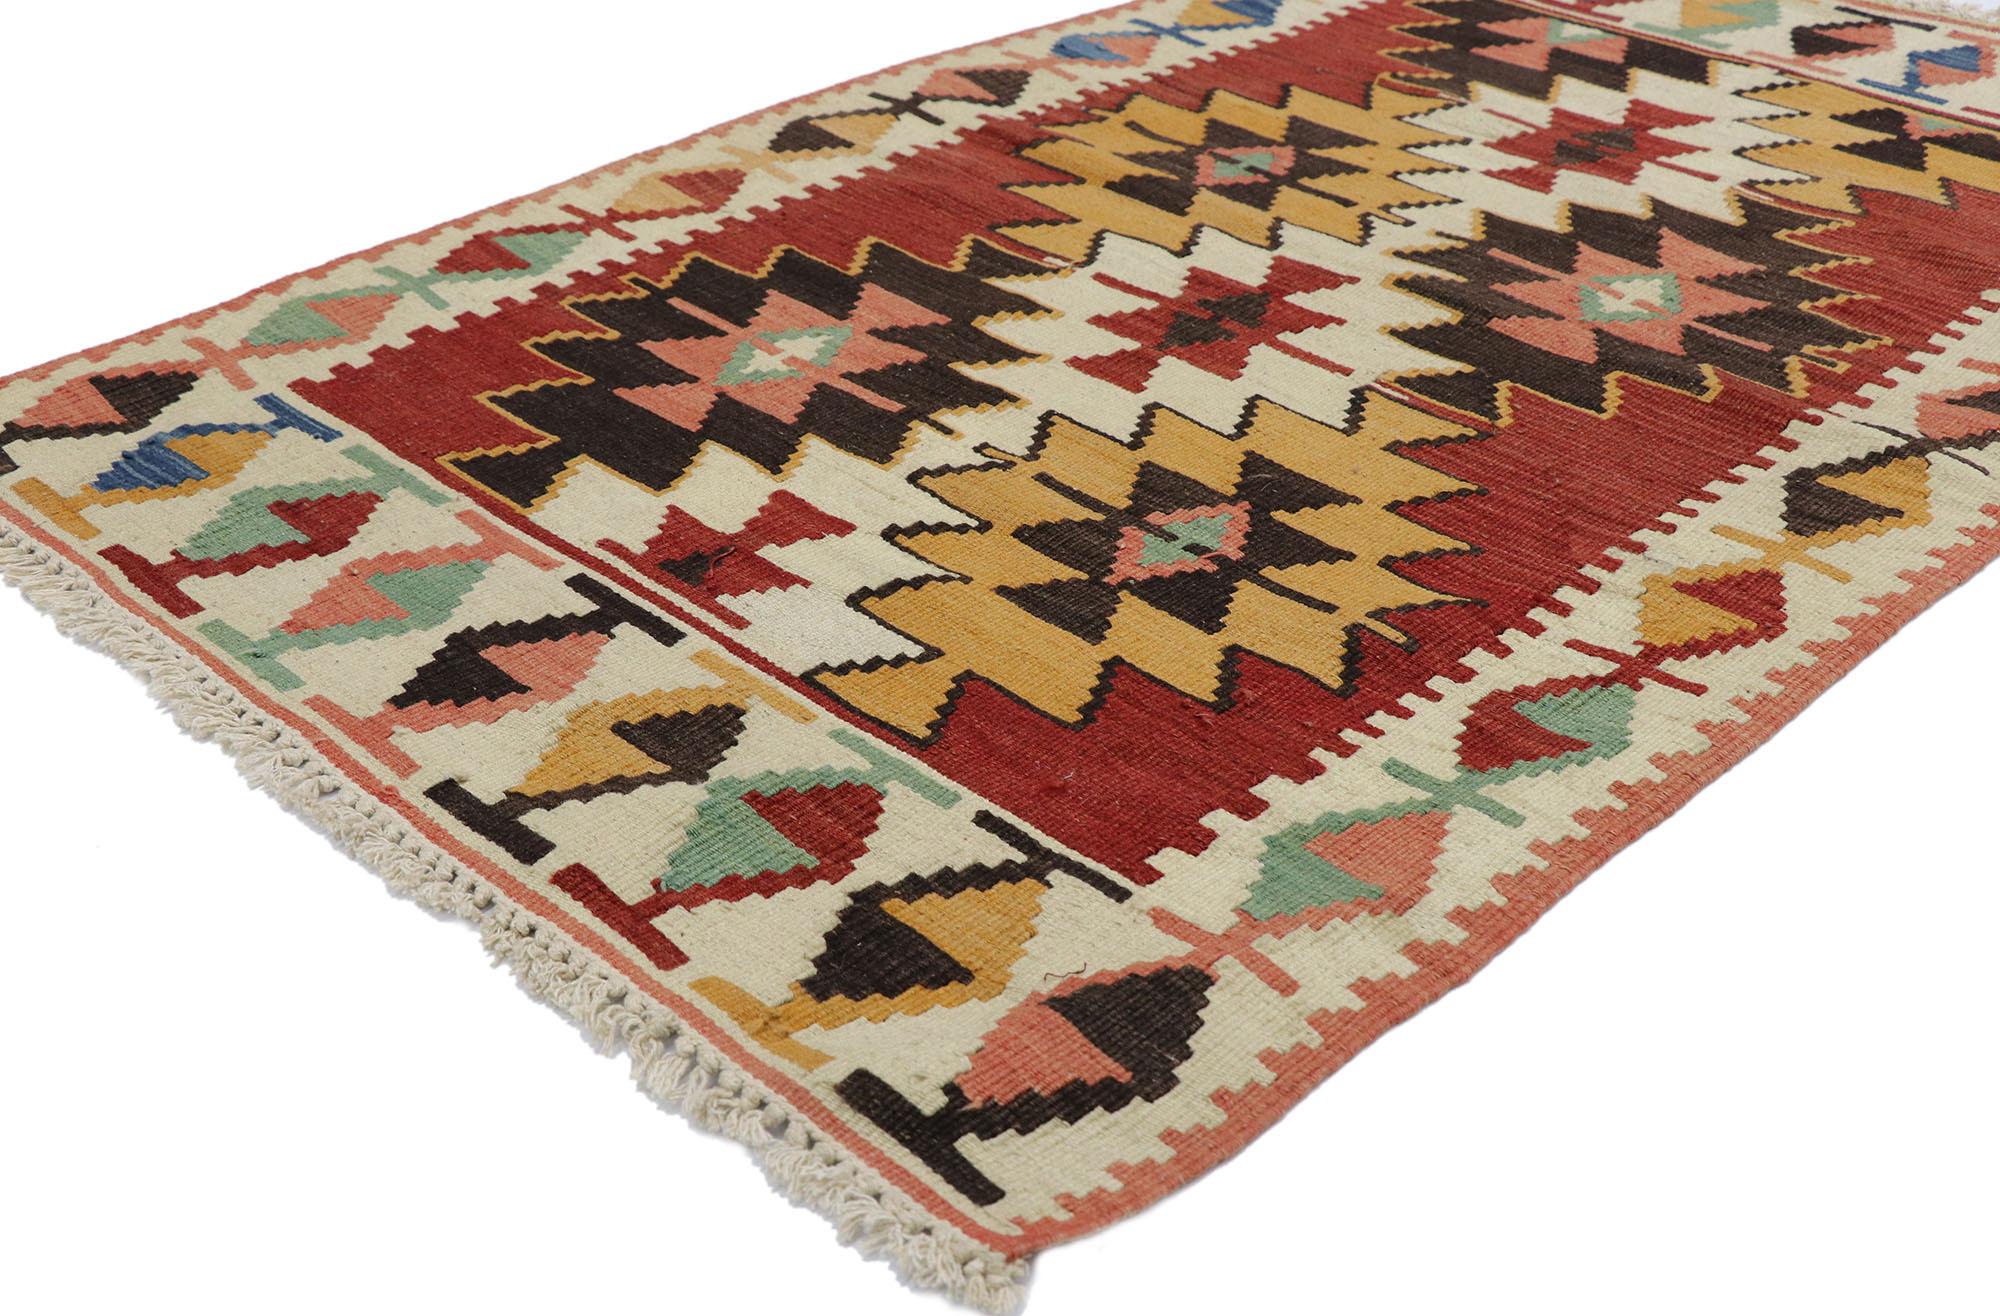 78037 vintage Persian Shiraz Kilim rug with Southwestern Tribal style 03'00 x 04'07. Full of tiny details and a bold expressive design combined with vibrant colors and tribal style, this hand-woven wool vintage Persian Shiraz kilim rug is a